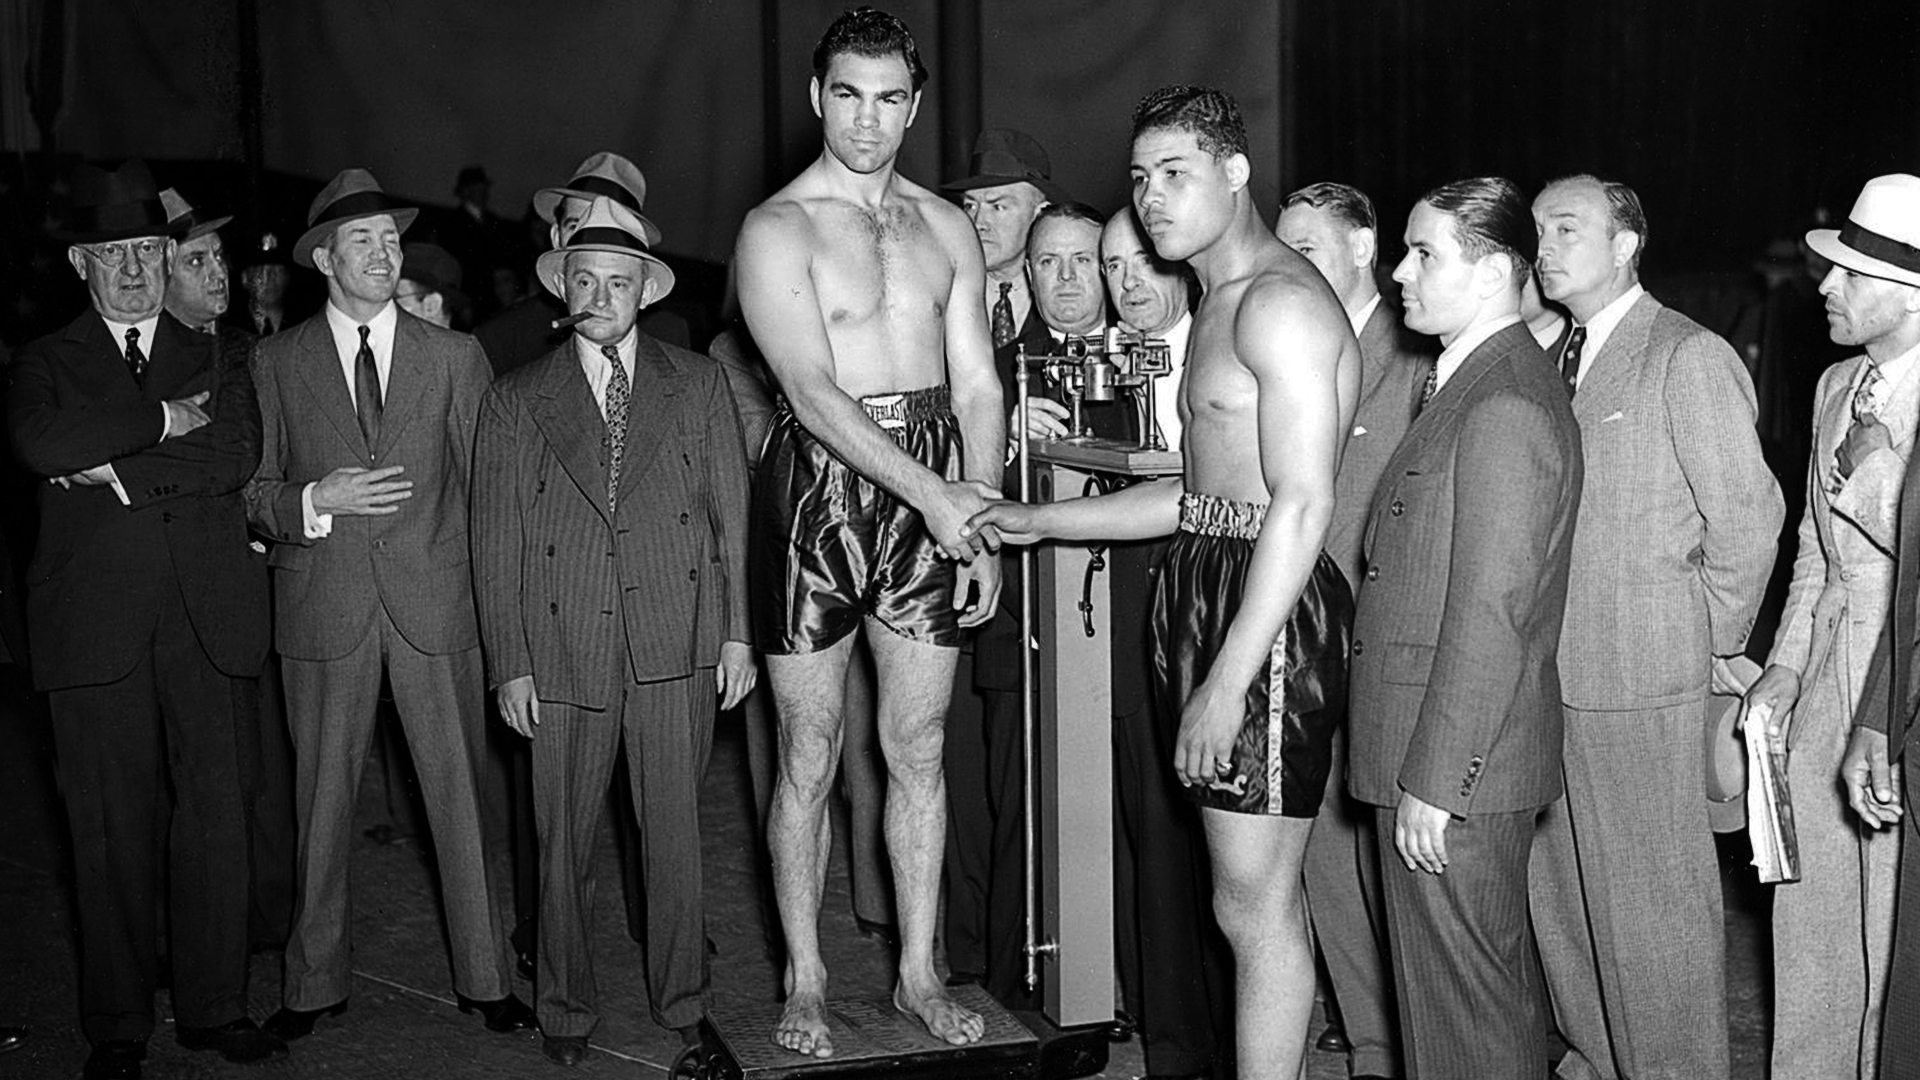 Joe Louis Max Schmeling Boxing Legends Handshake Suits Monochrome Weigh In Cigars 1936 Germany USA 1920x1080